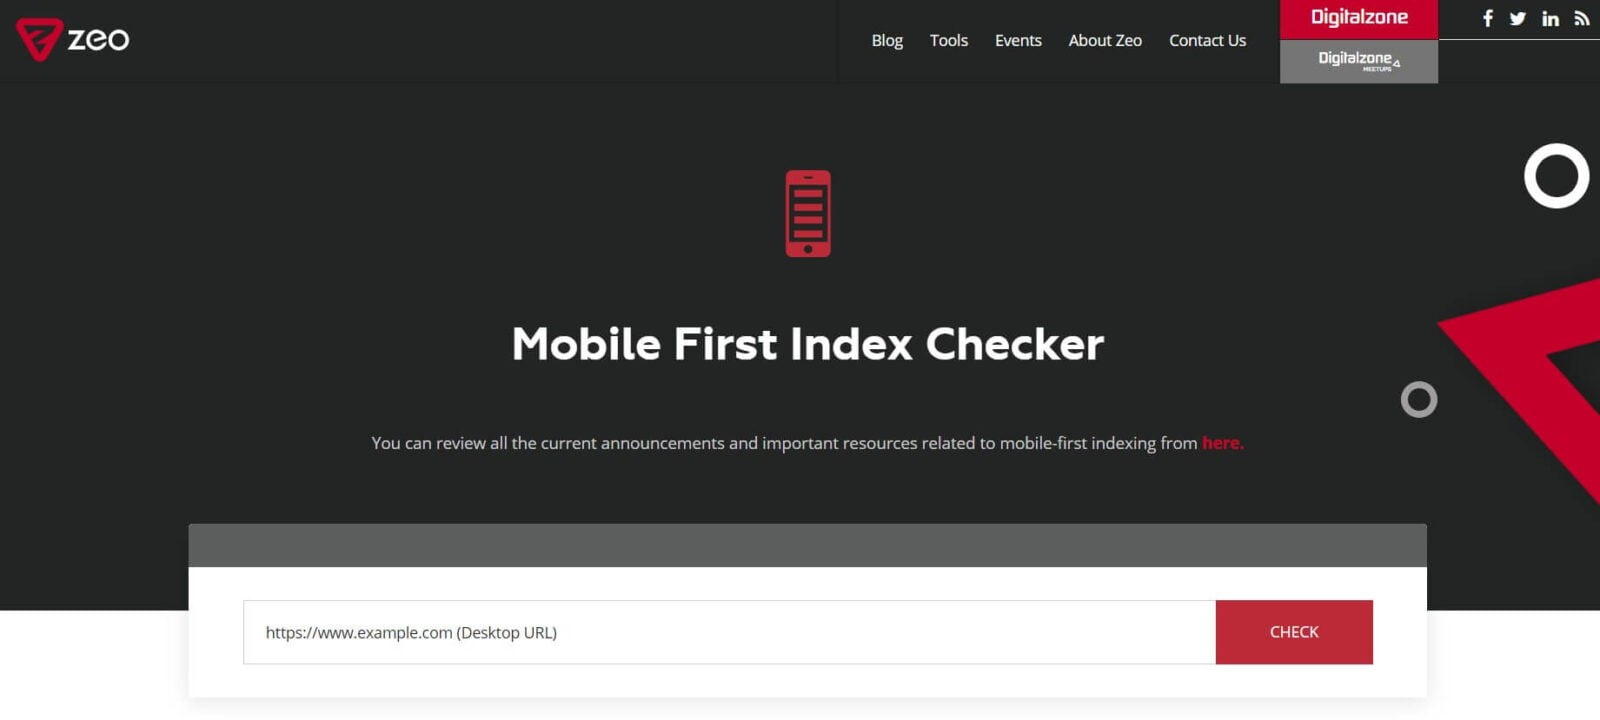 Mobile First Index Checker - SEO Tool